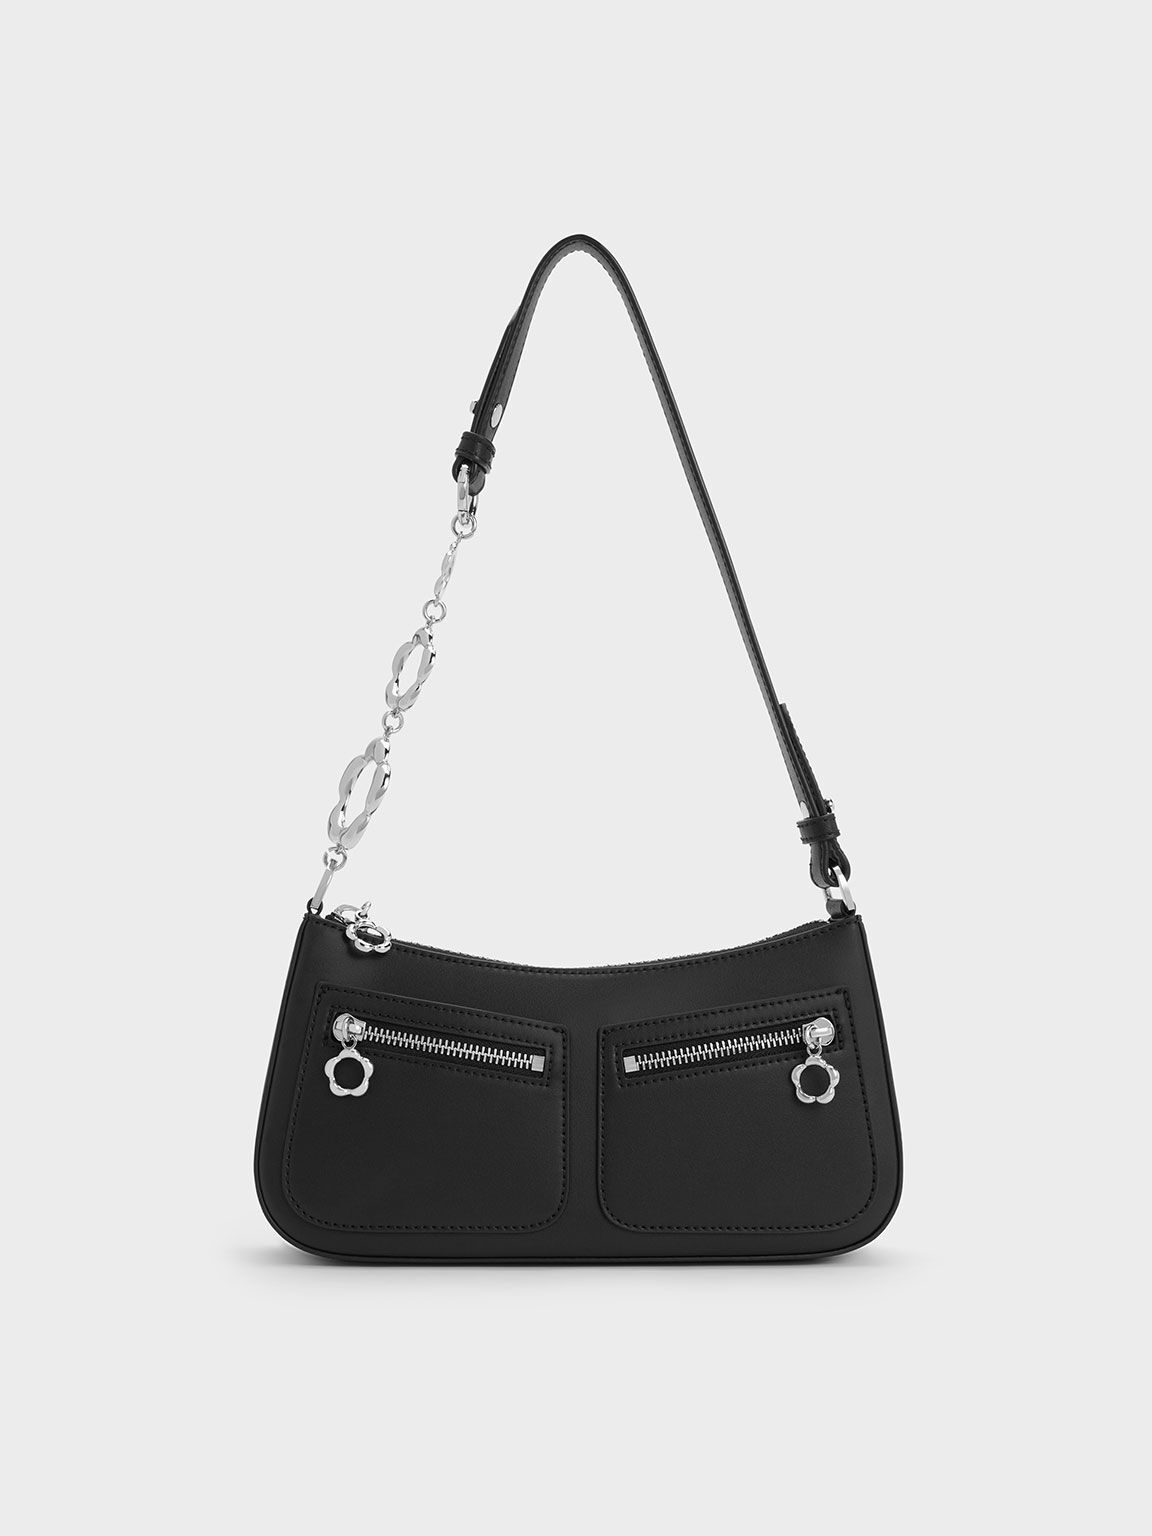 CHARLES & KEITH Black Bags & Handbags for Women for sale